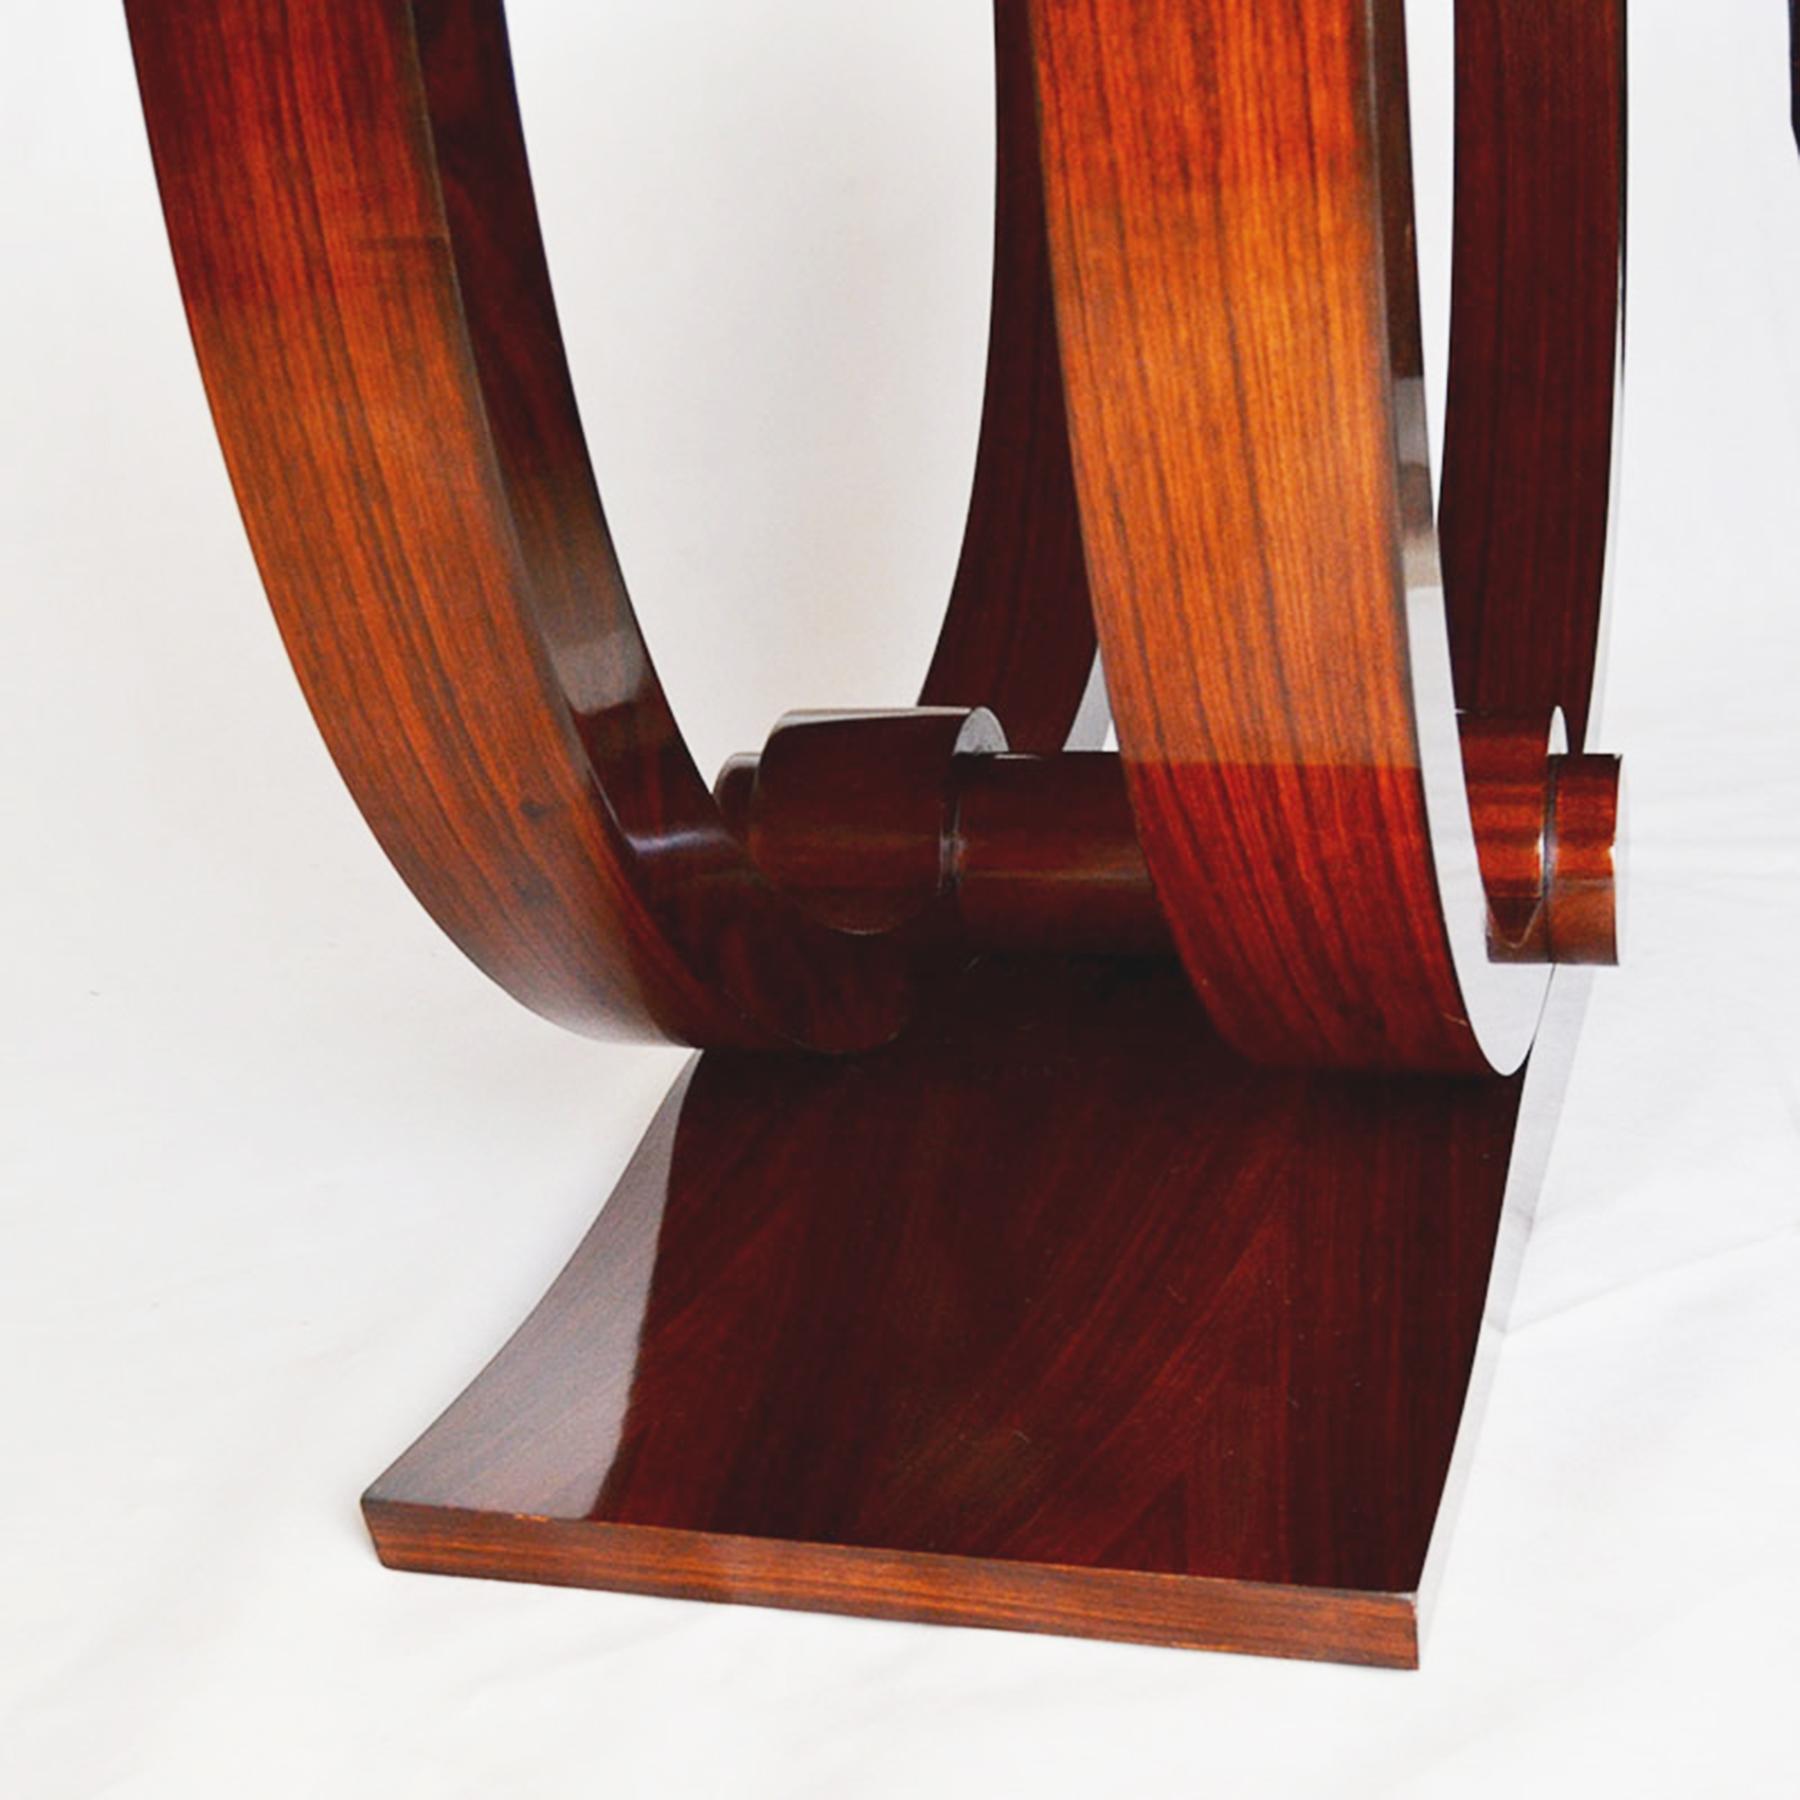 Art Deco Table with Double Arch Base in Extendable Indian Rosewood 1930s, France In Excellent Condition For Sale In La Bisbal de l'Empordà, ES